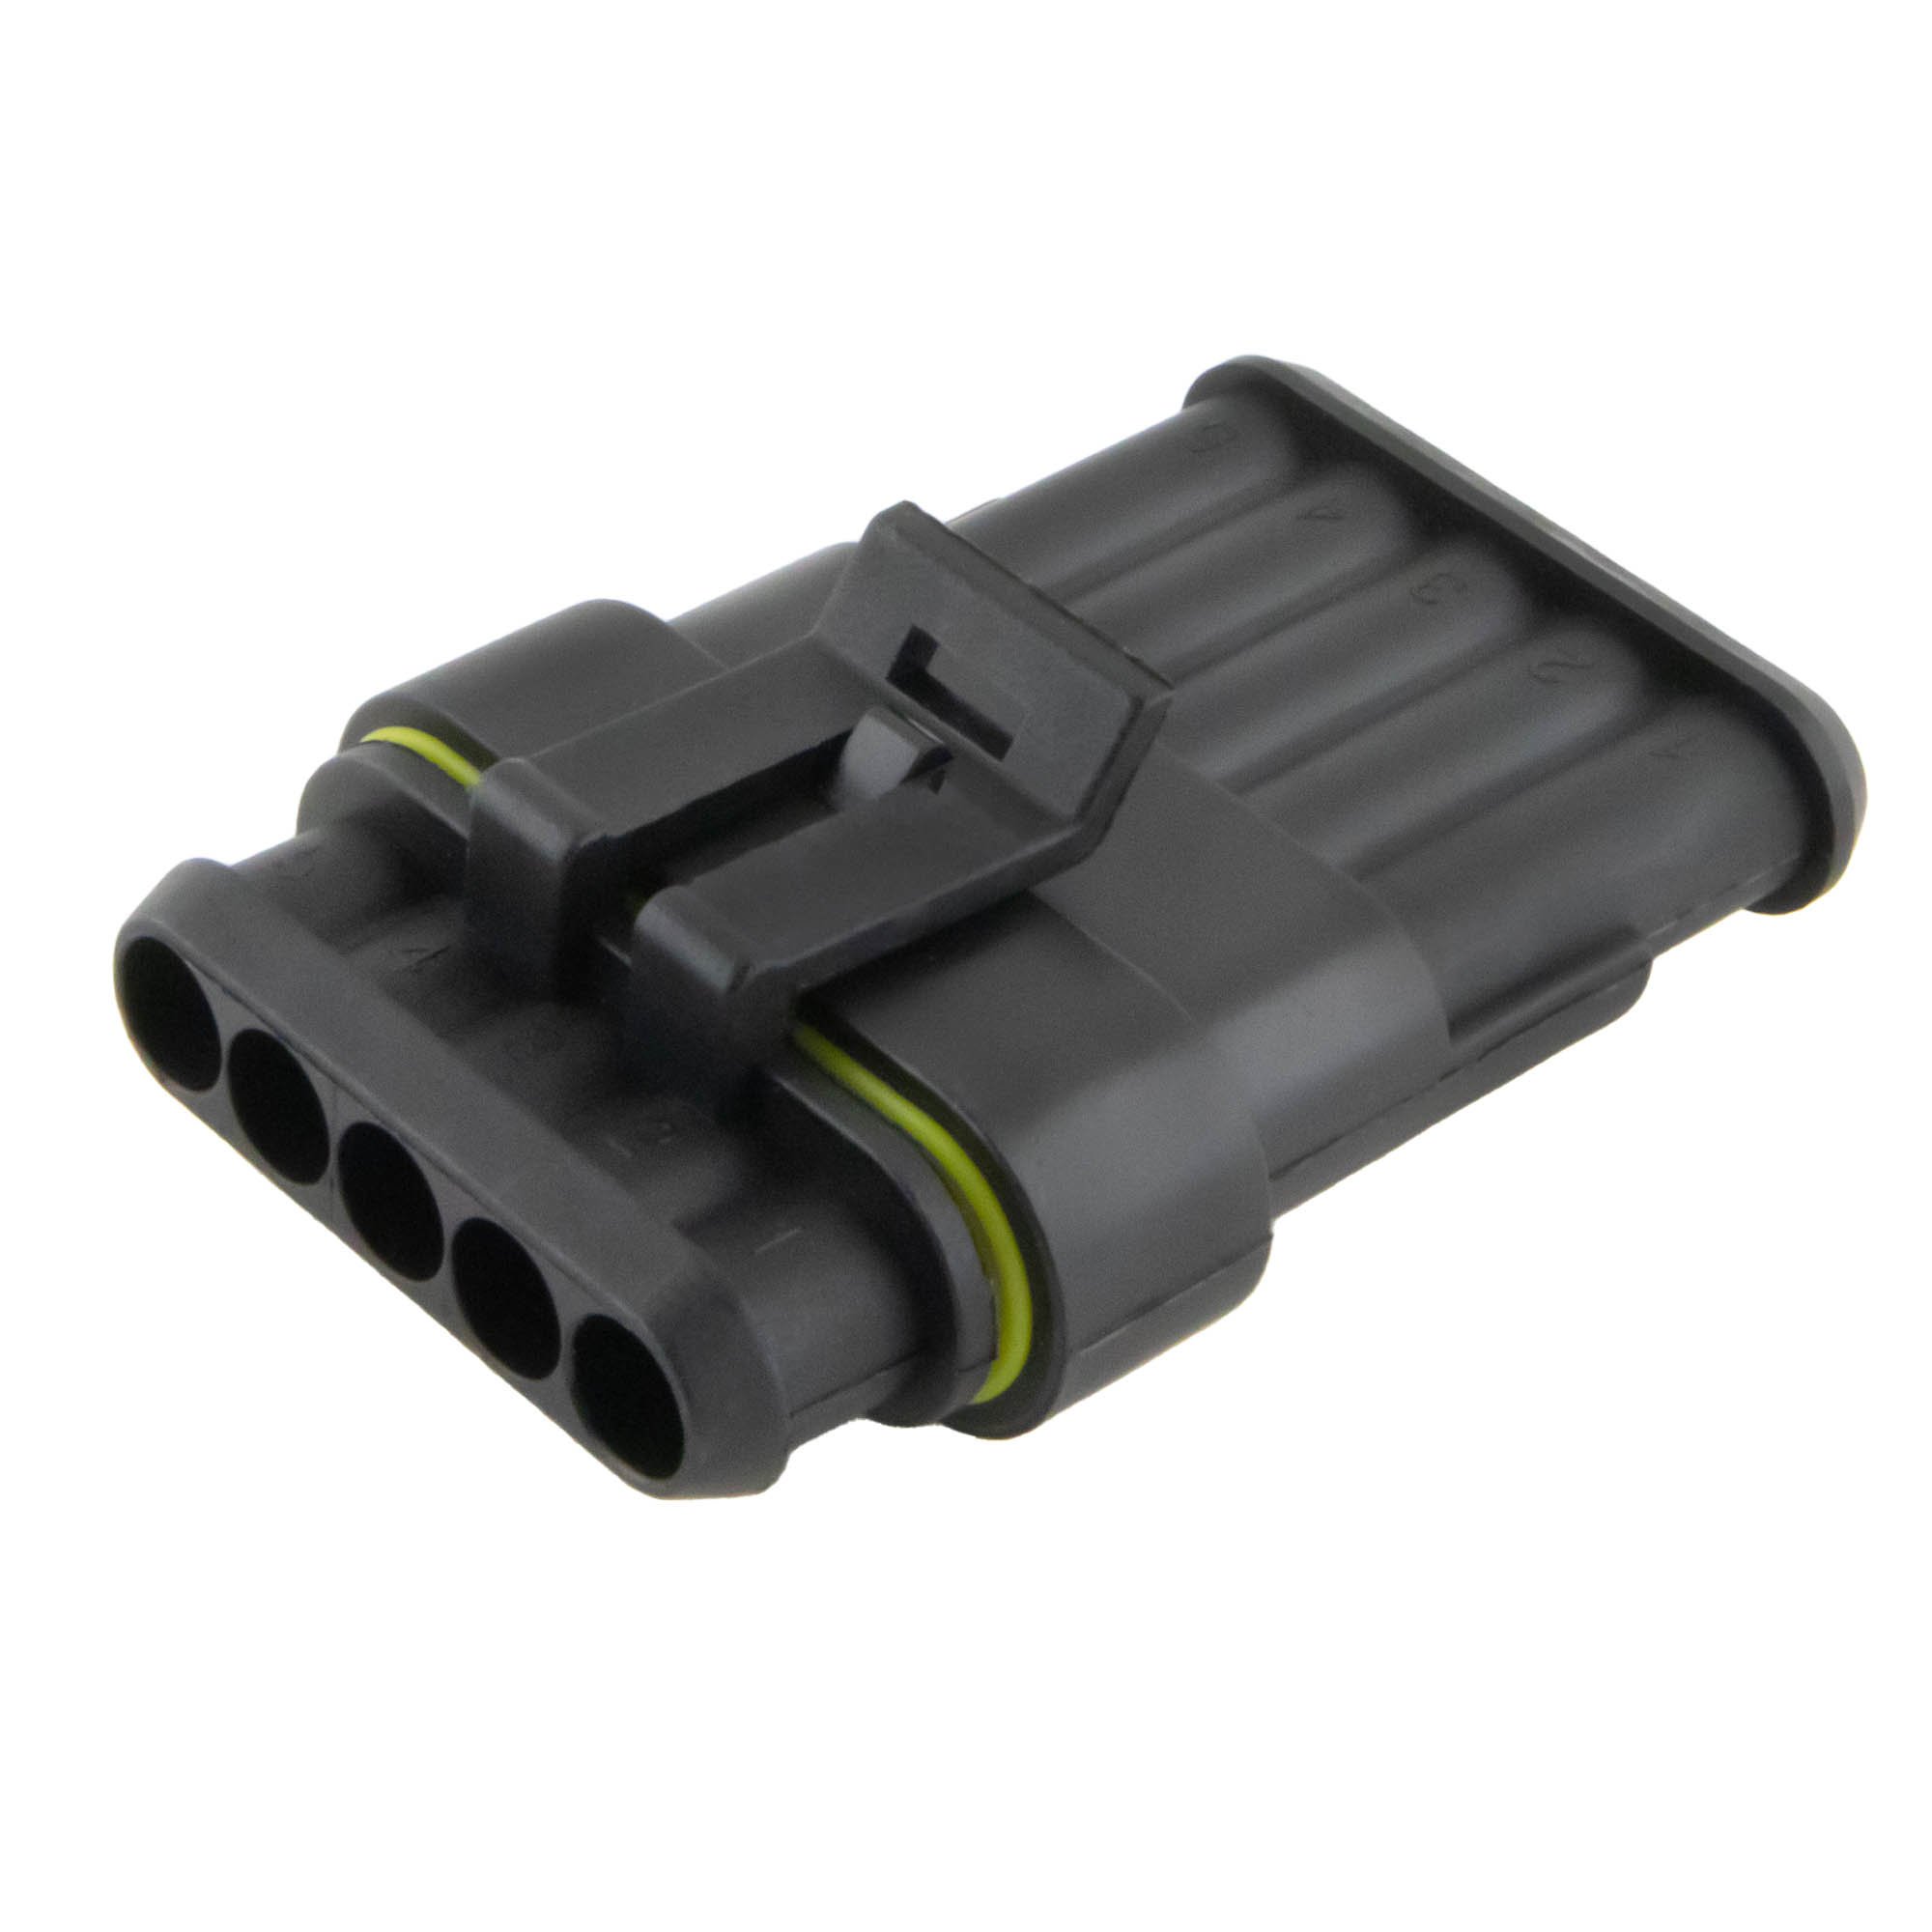 Cable Connector 5-Pin - 10PCS